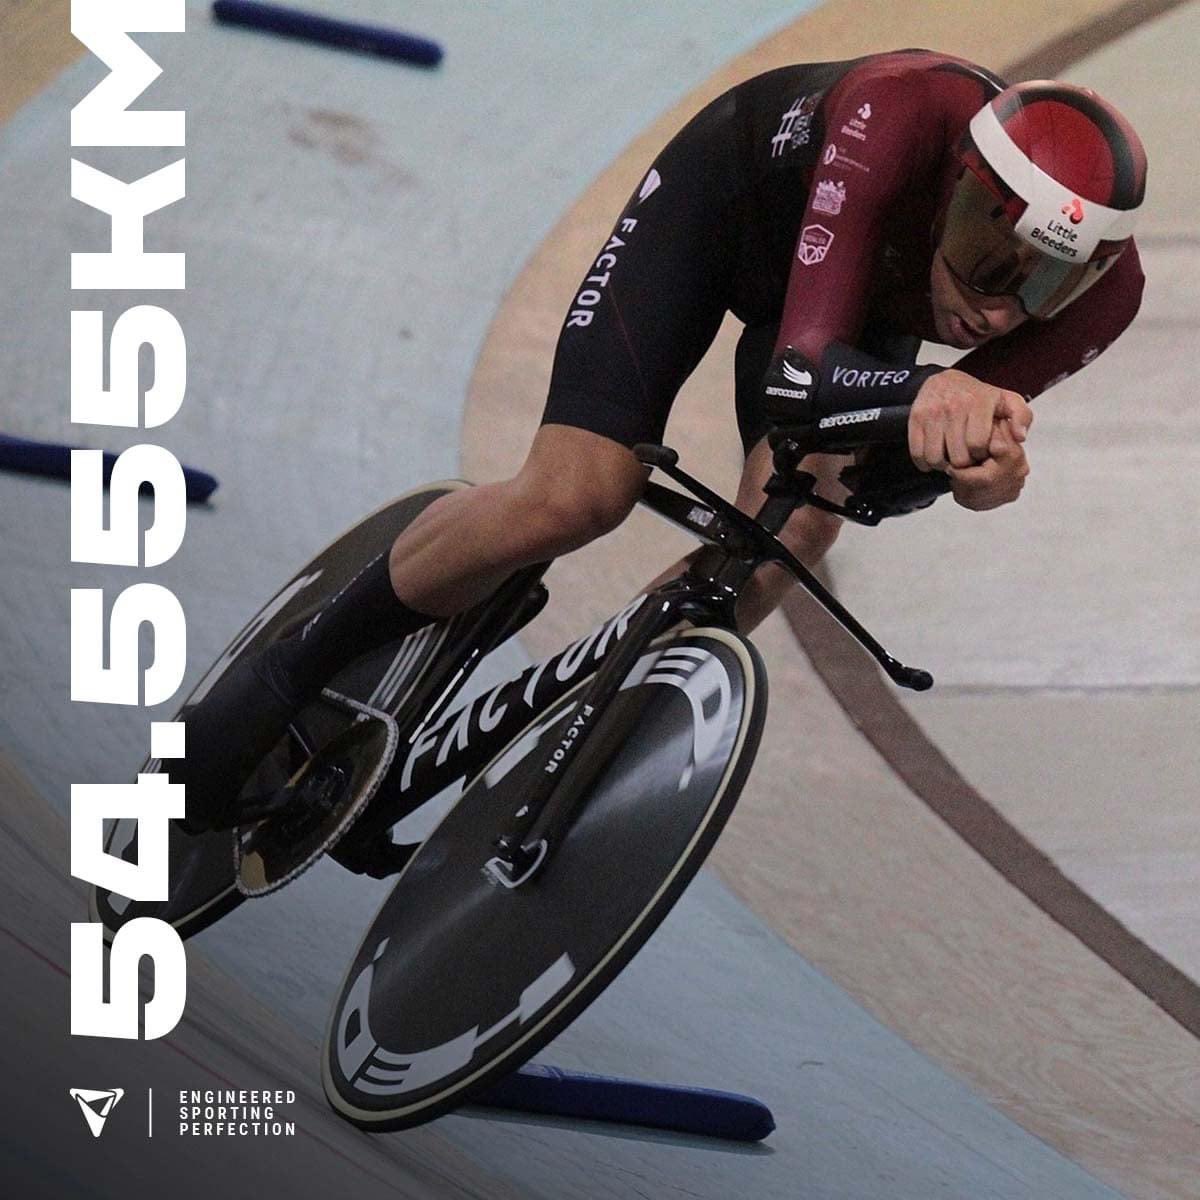 Alex' attempt was just short of the Hour Record, but it was still an impressive ride and he found a huge step from his previous effort in 2015. #engineeredsportingperfection #vorteqsports #aero